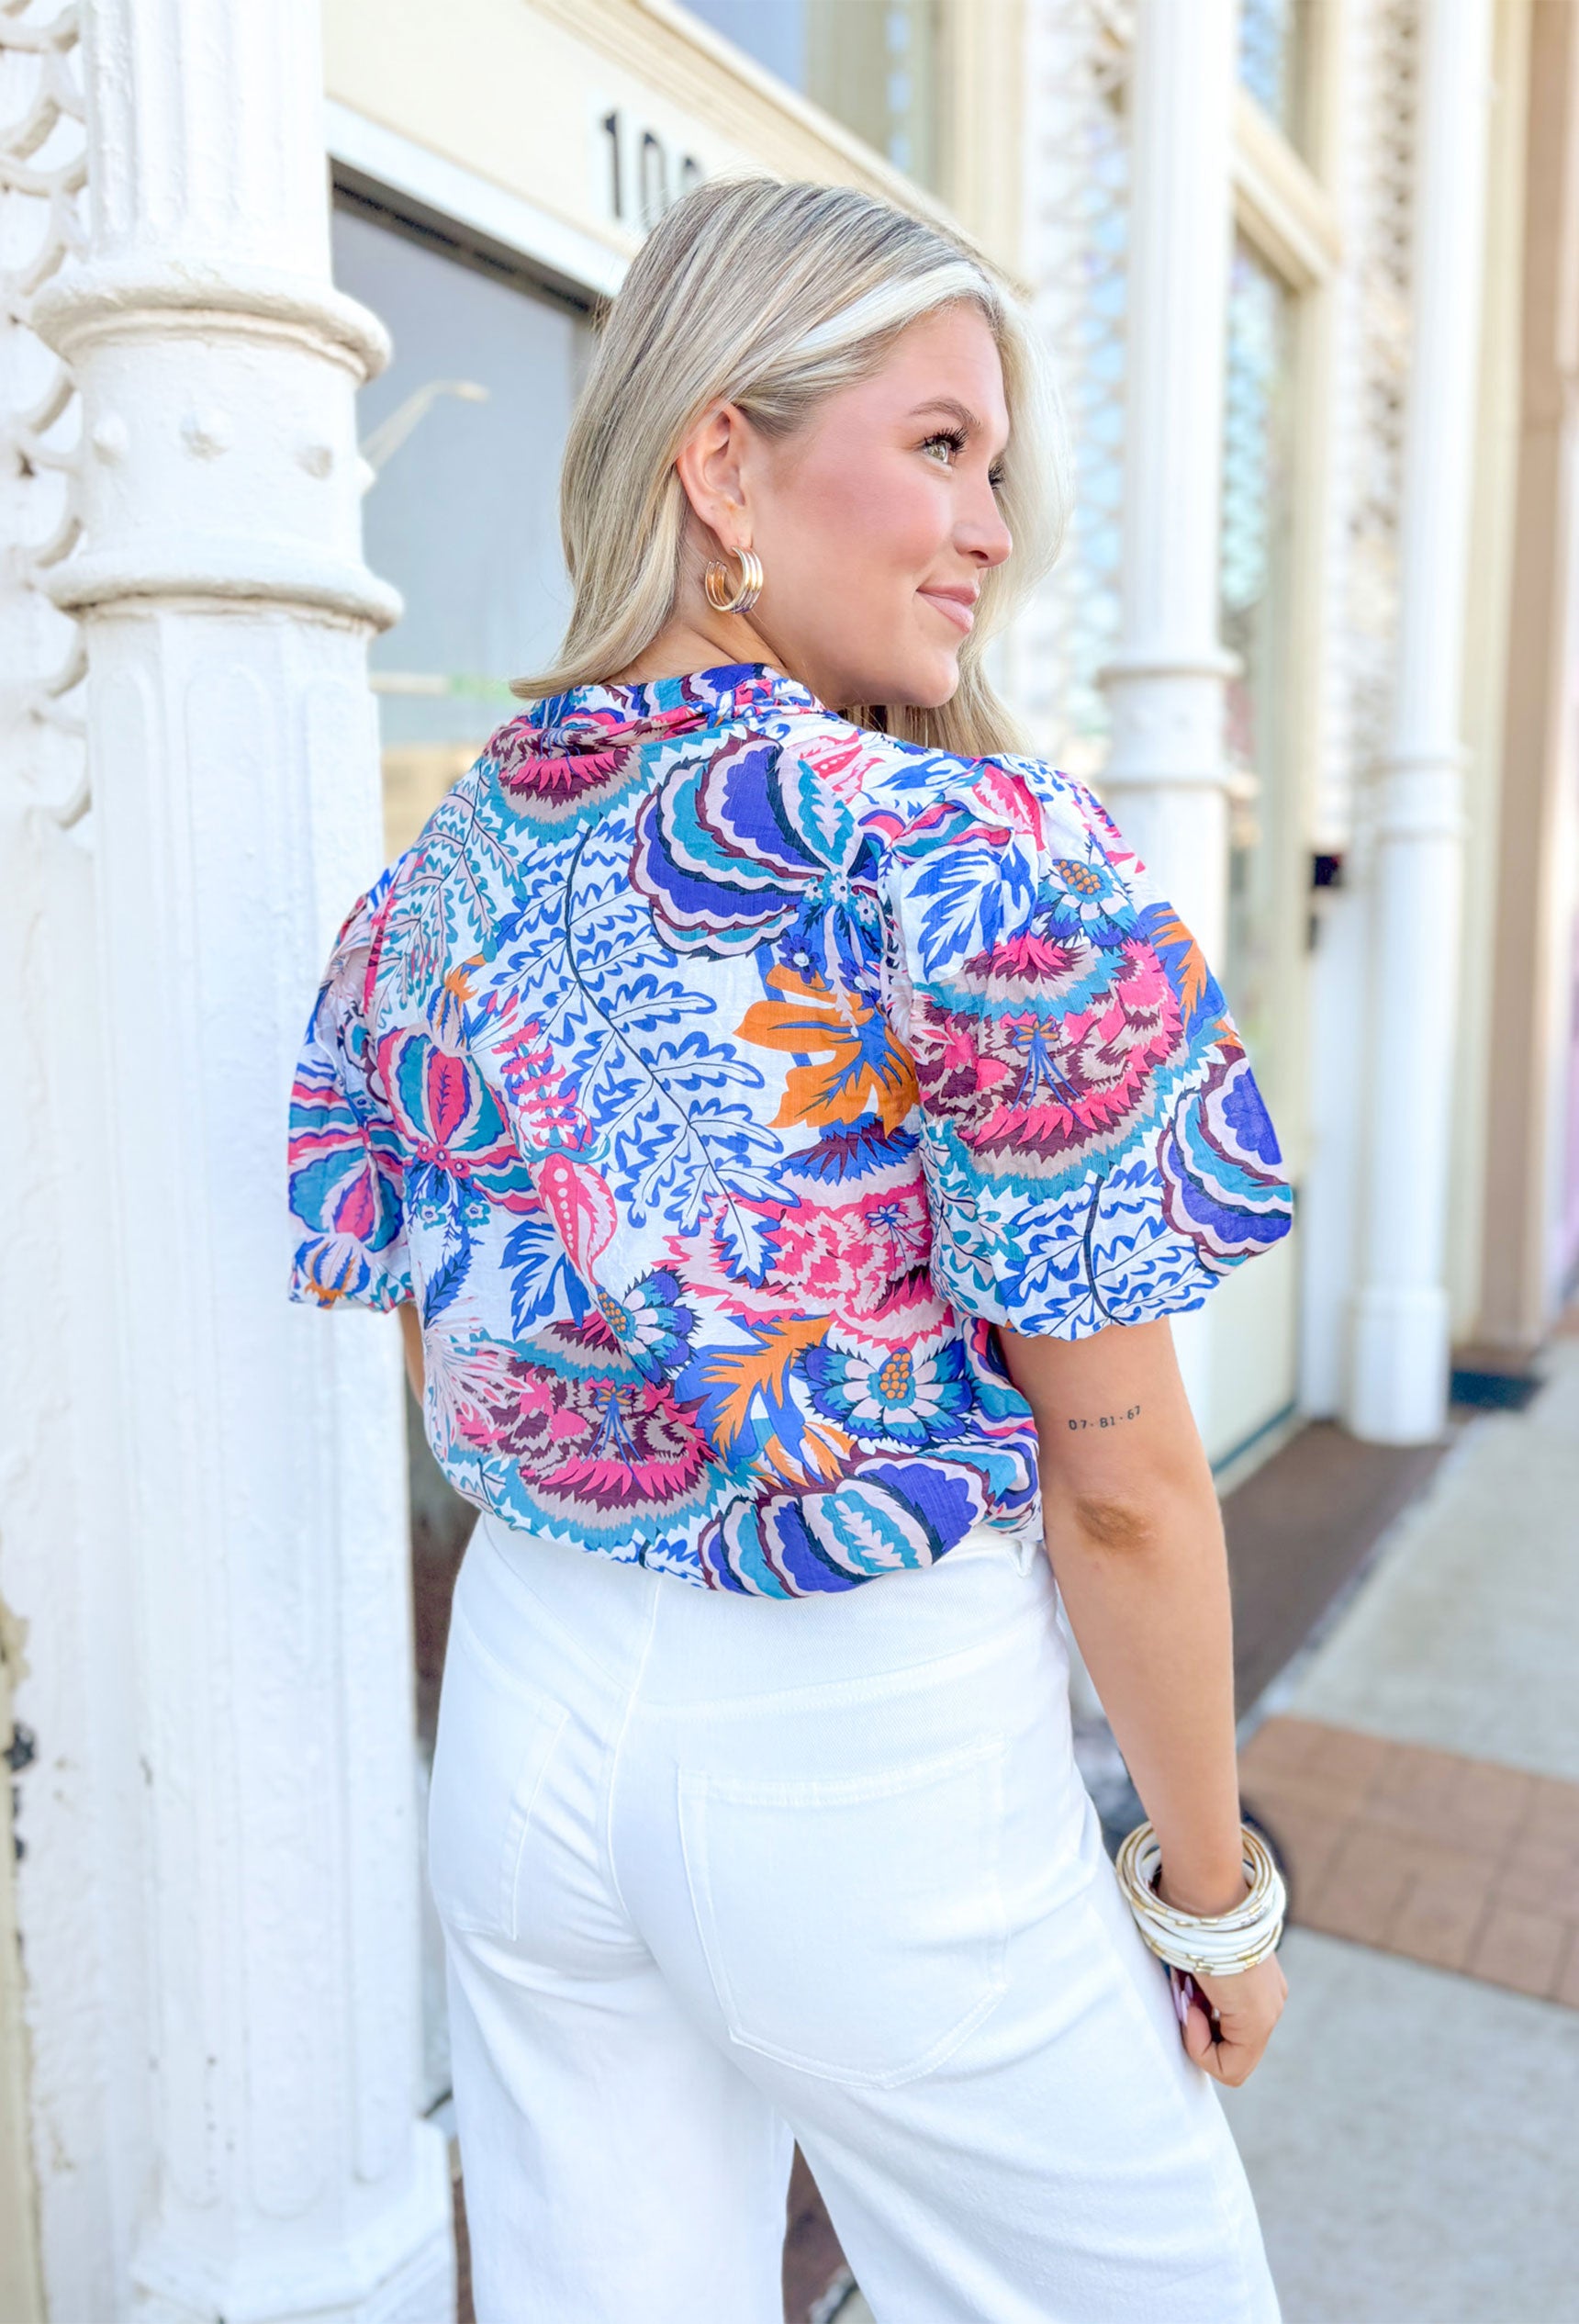 Make It Happen Blouse, puff sleeve floral blouse in the colors royal blue, fuchsia, sunset orange, white, light pink, turquoise, hot pink, and navy